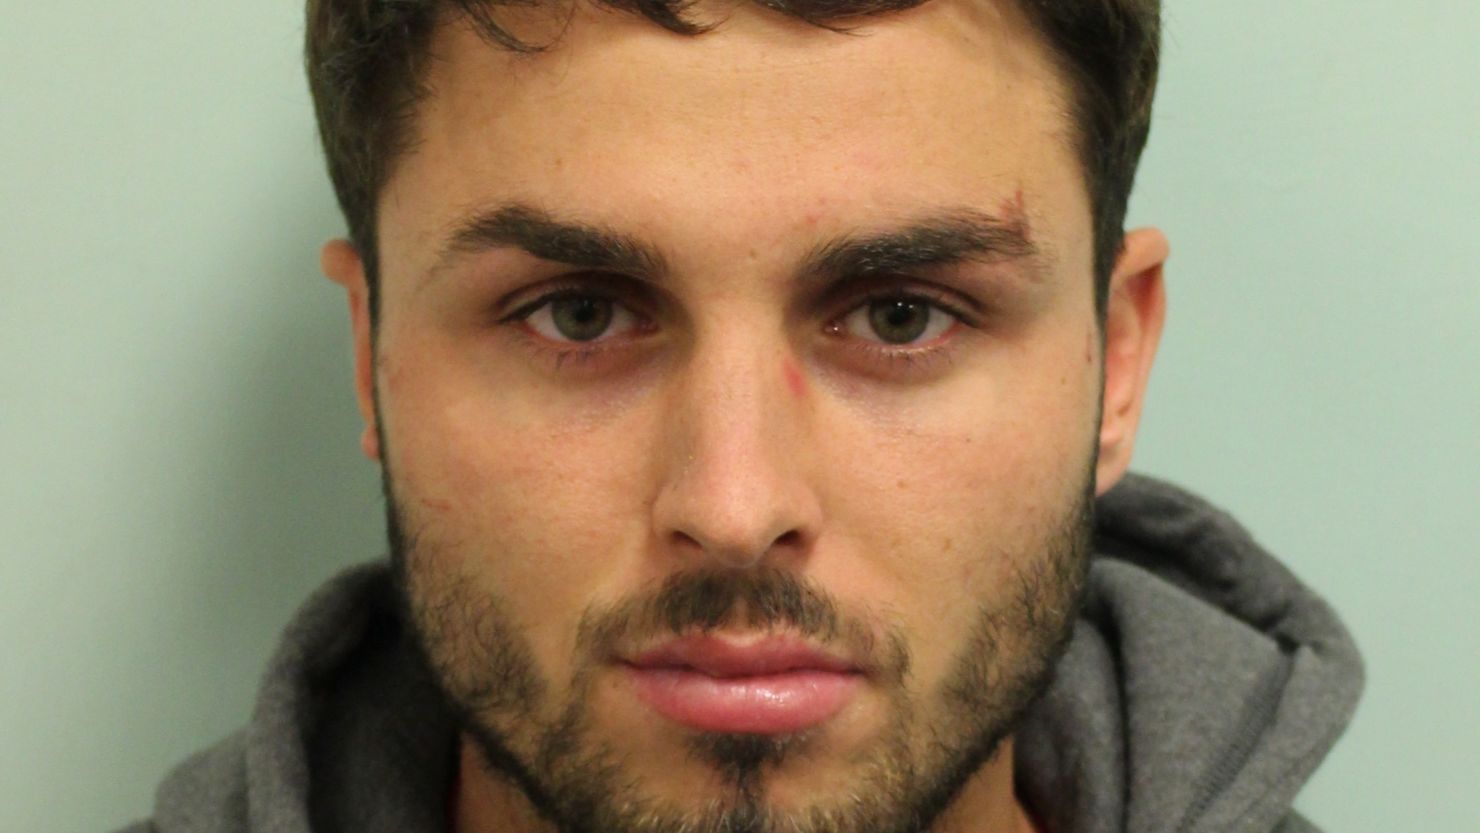 Acid attack perpetrator Arthur Collins who has been jailed for 20 years for an incident in a London nightclub in which 22 people were injured. 